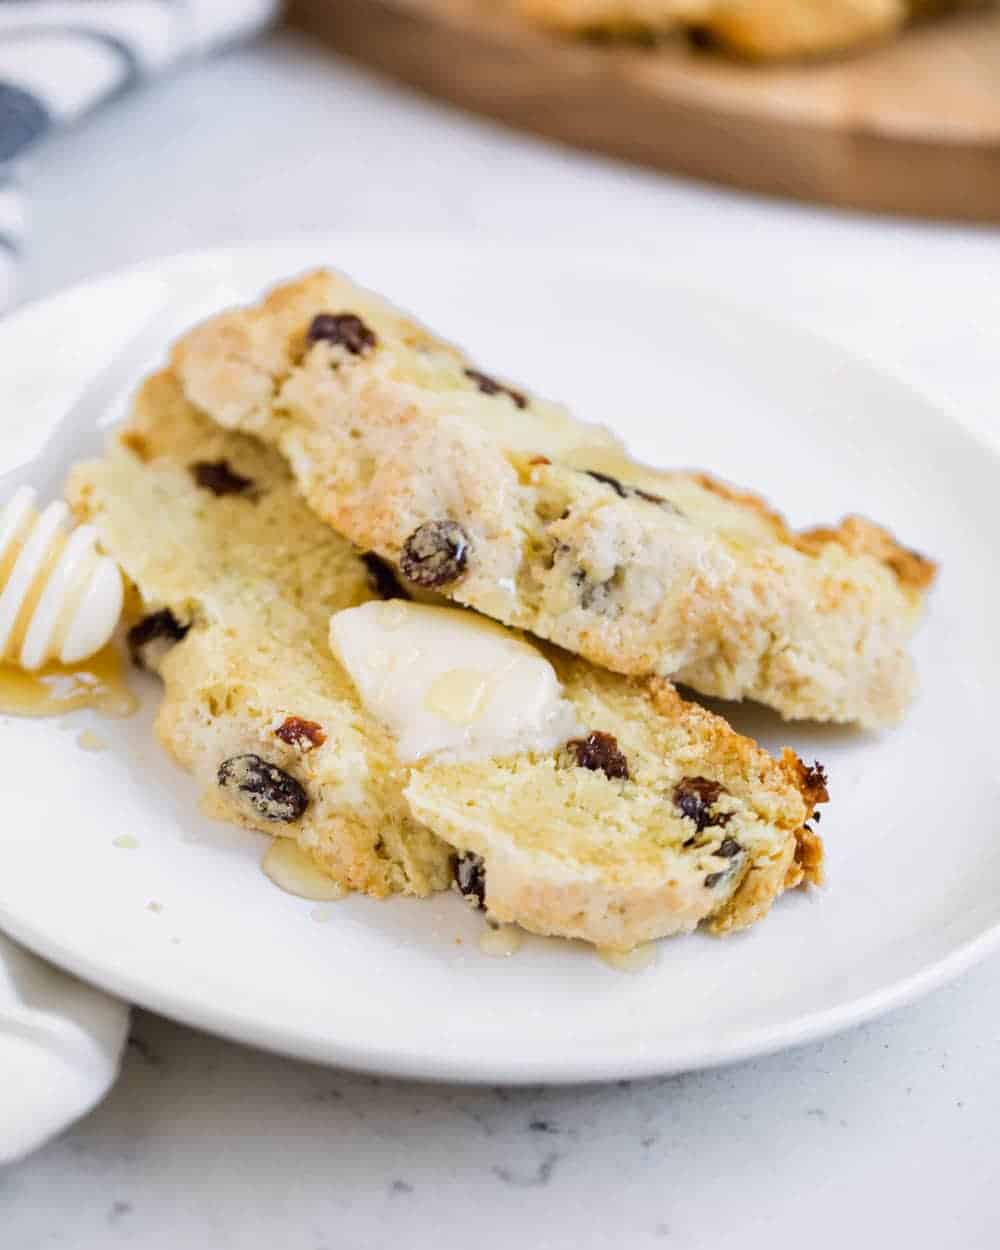 Irish soda bread with raisins that's topped with butter and honey